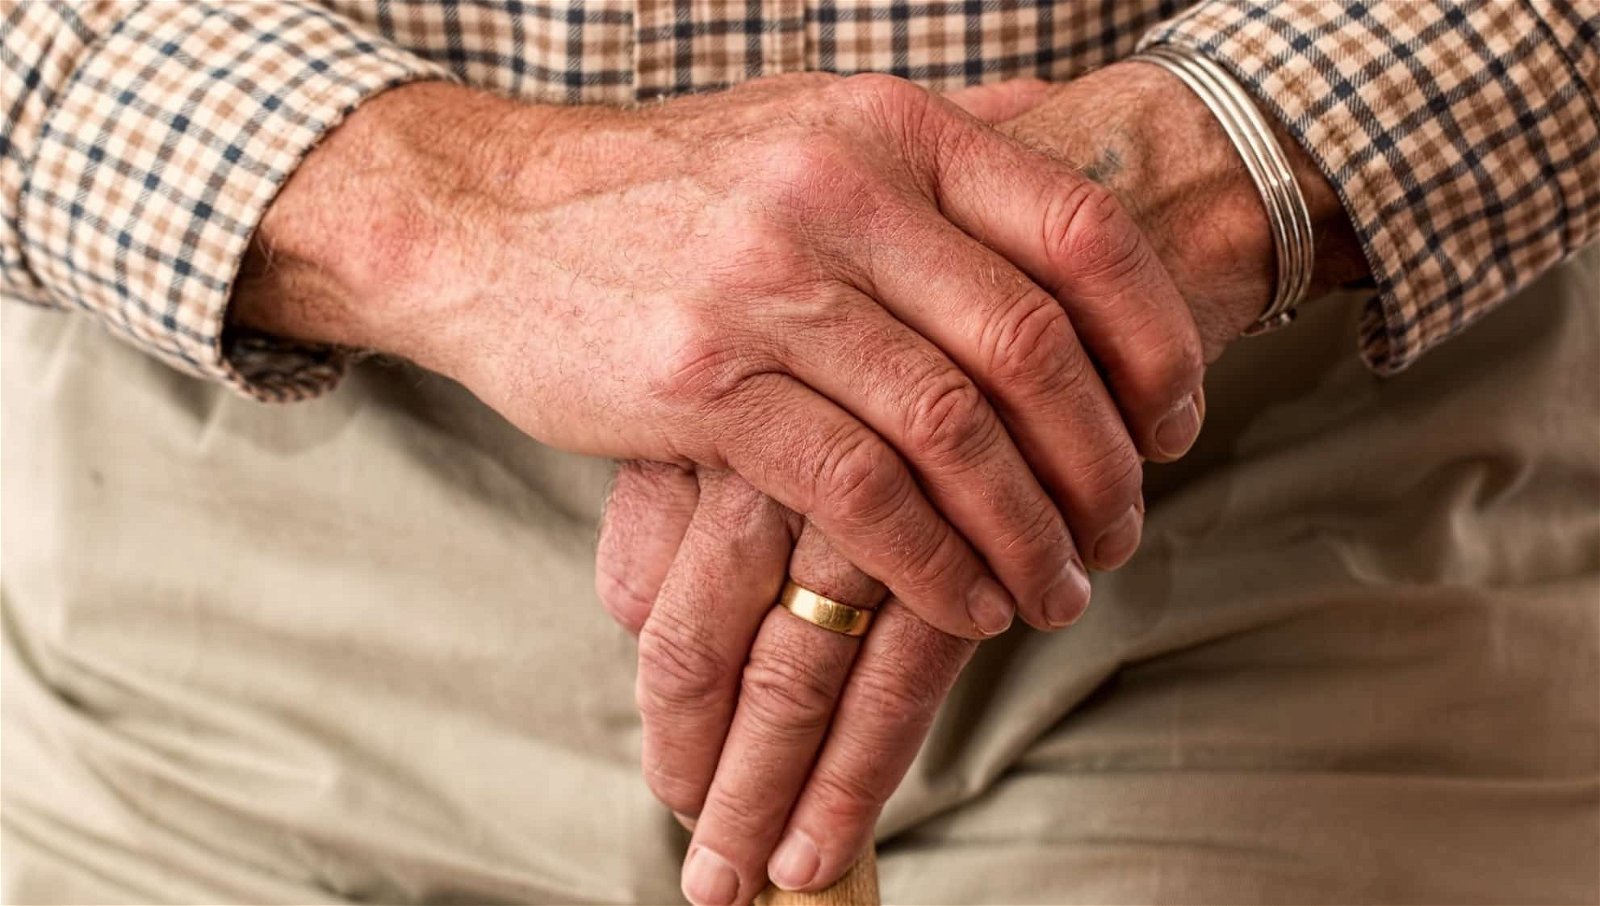 Close-up of an elderly man’s clasped hands resting on his lap, showing details like wrinkles and a wedding ring, highlighting aged skin and timeless love.